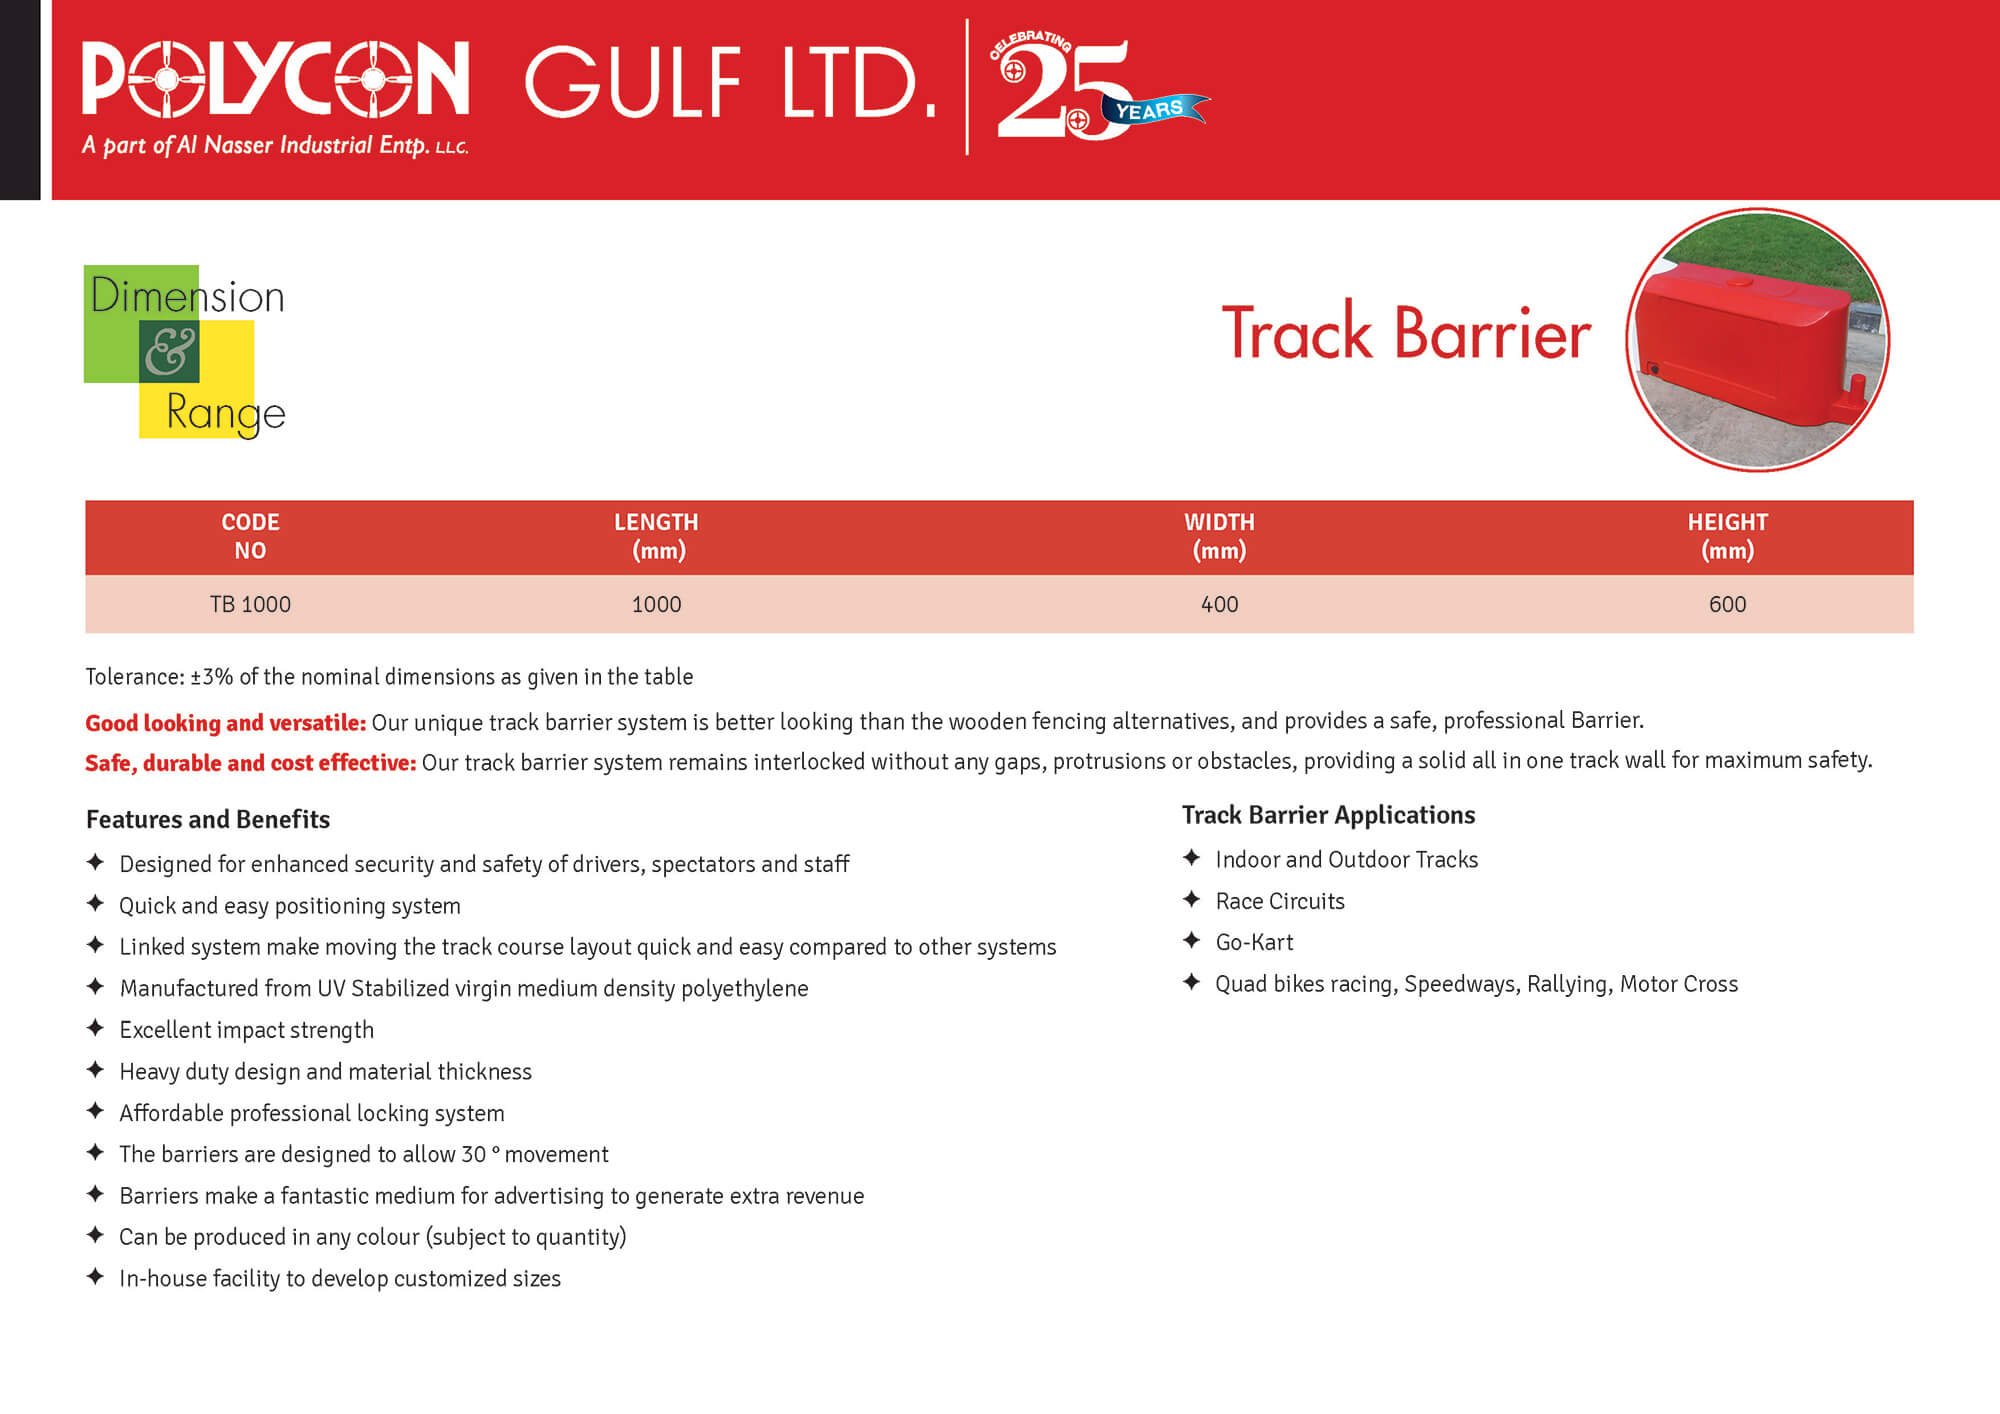 Track Barriers